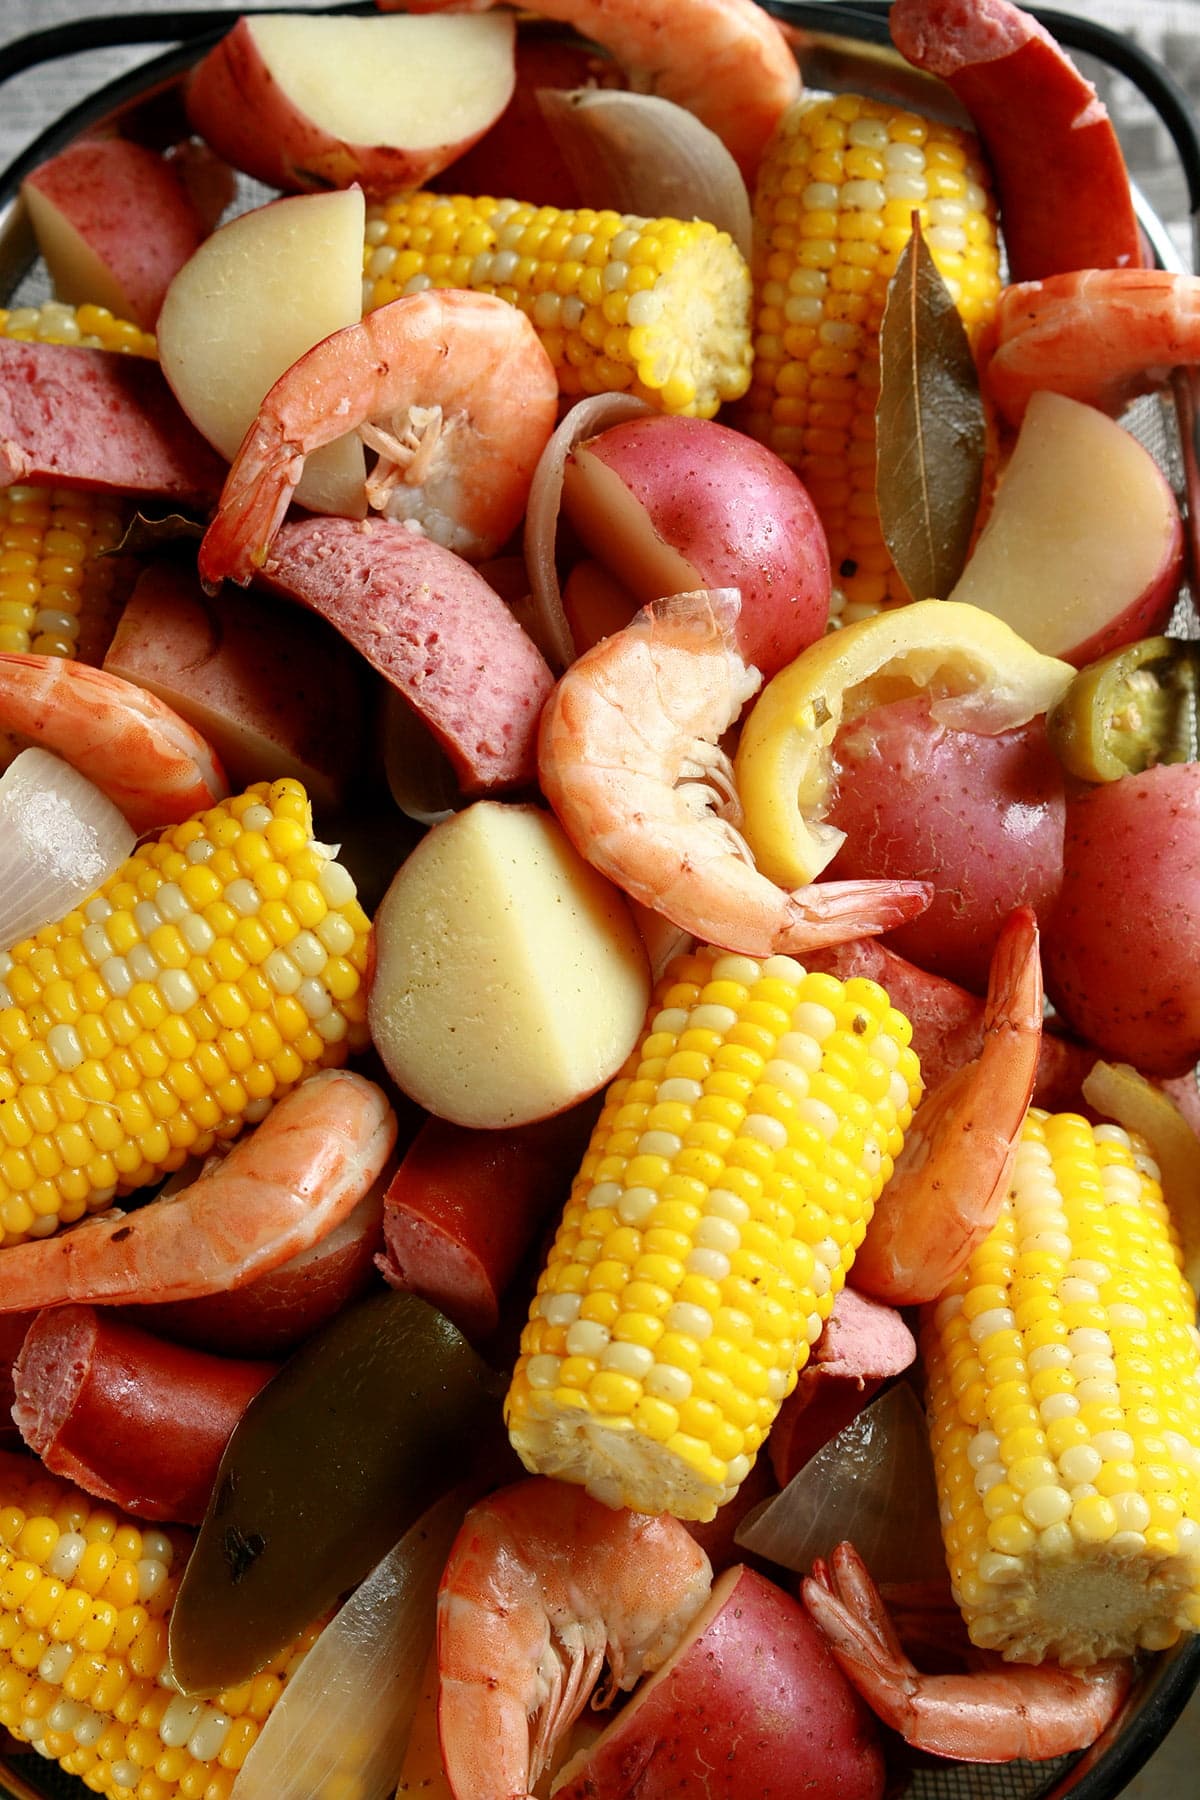 A close up view of a batch of low country boil: Red potatoes, corn on the cob, shrimp, and sausage.